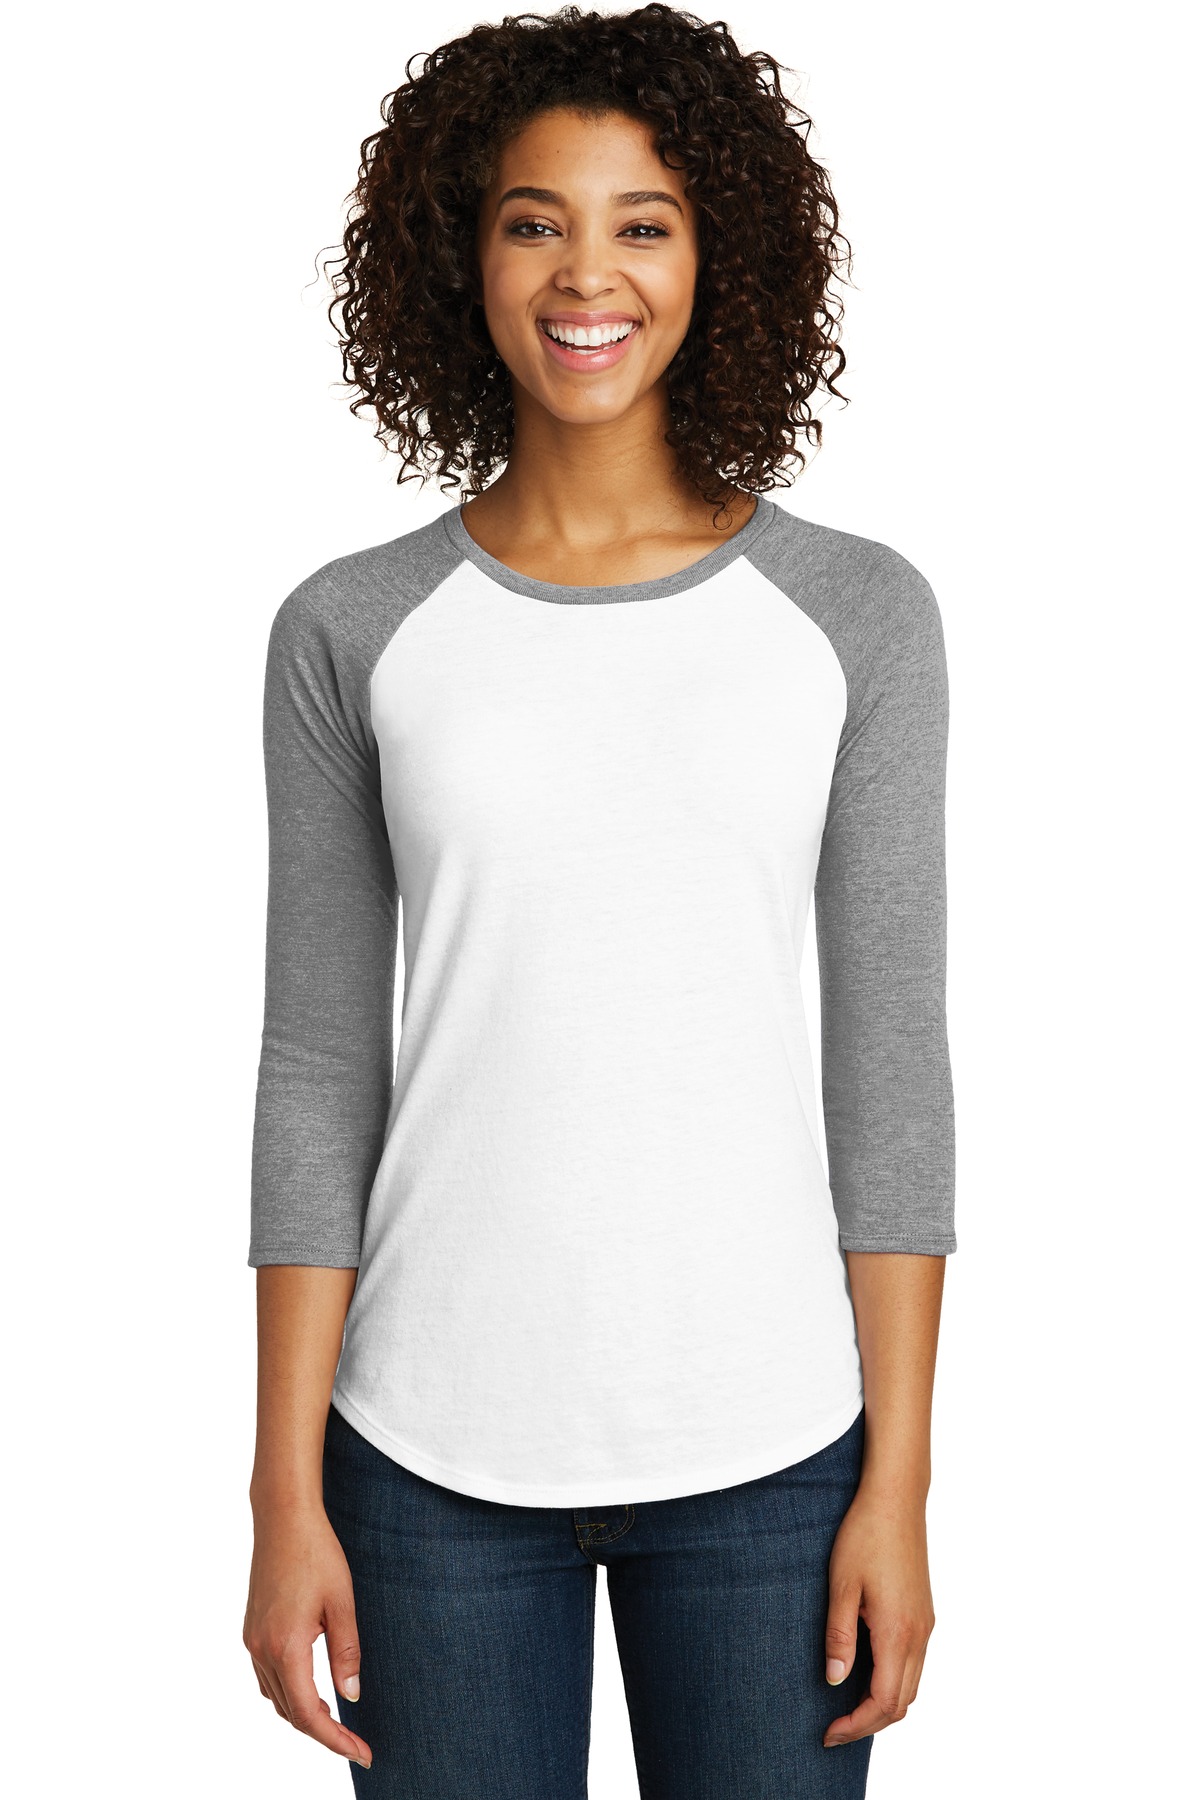 Front view of Women’s Fitted Very Important Tee® 3/4-Sleeve Raglan